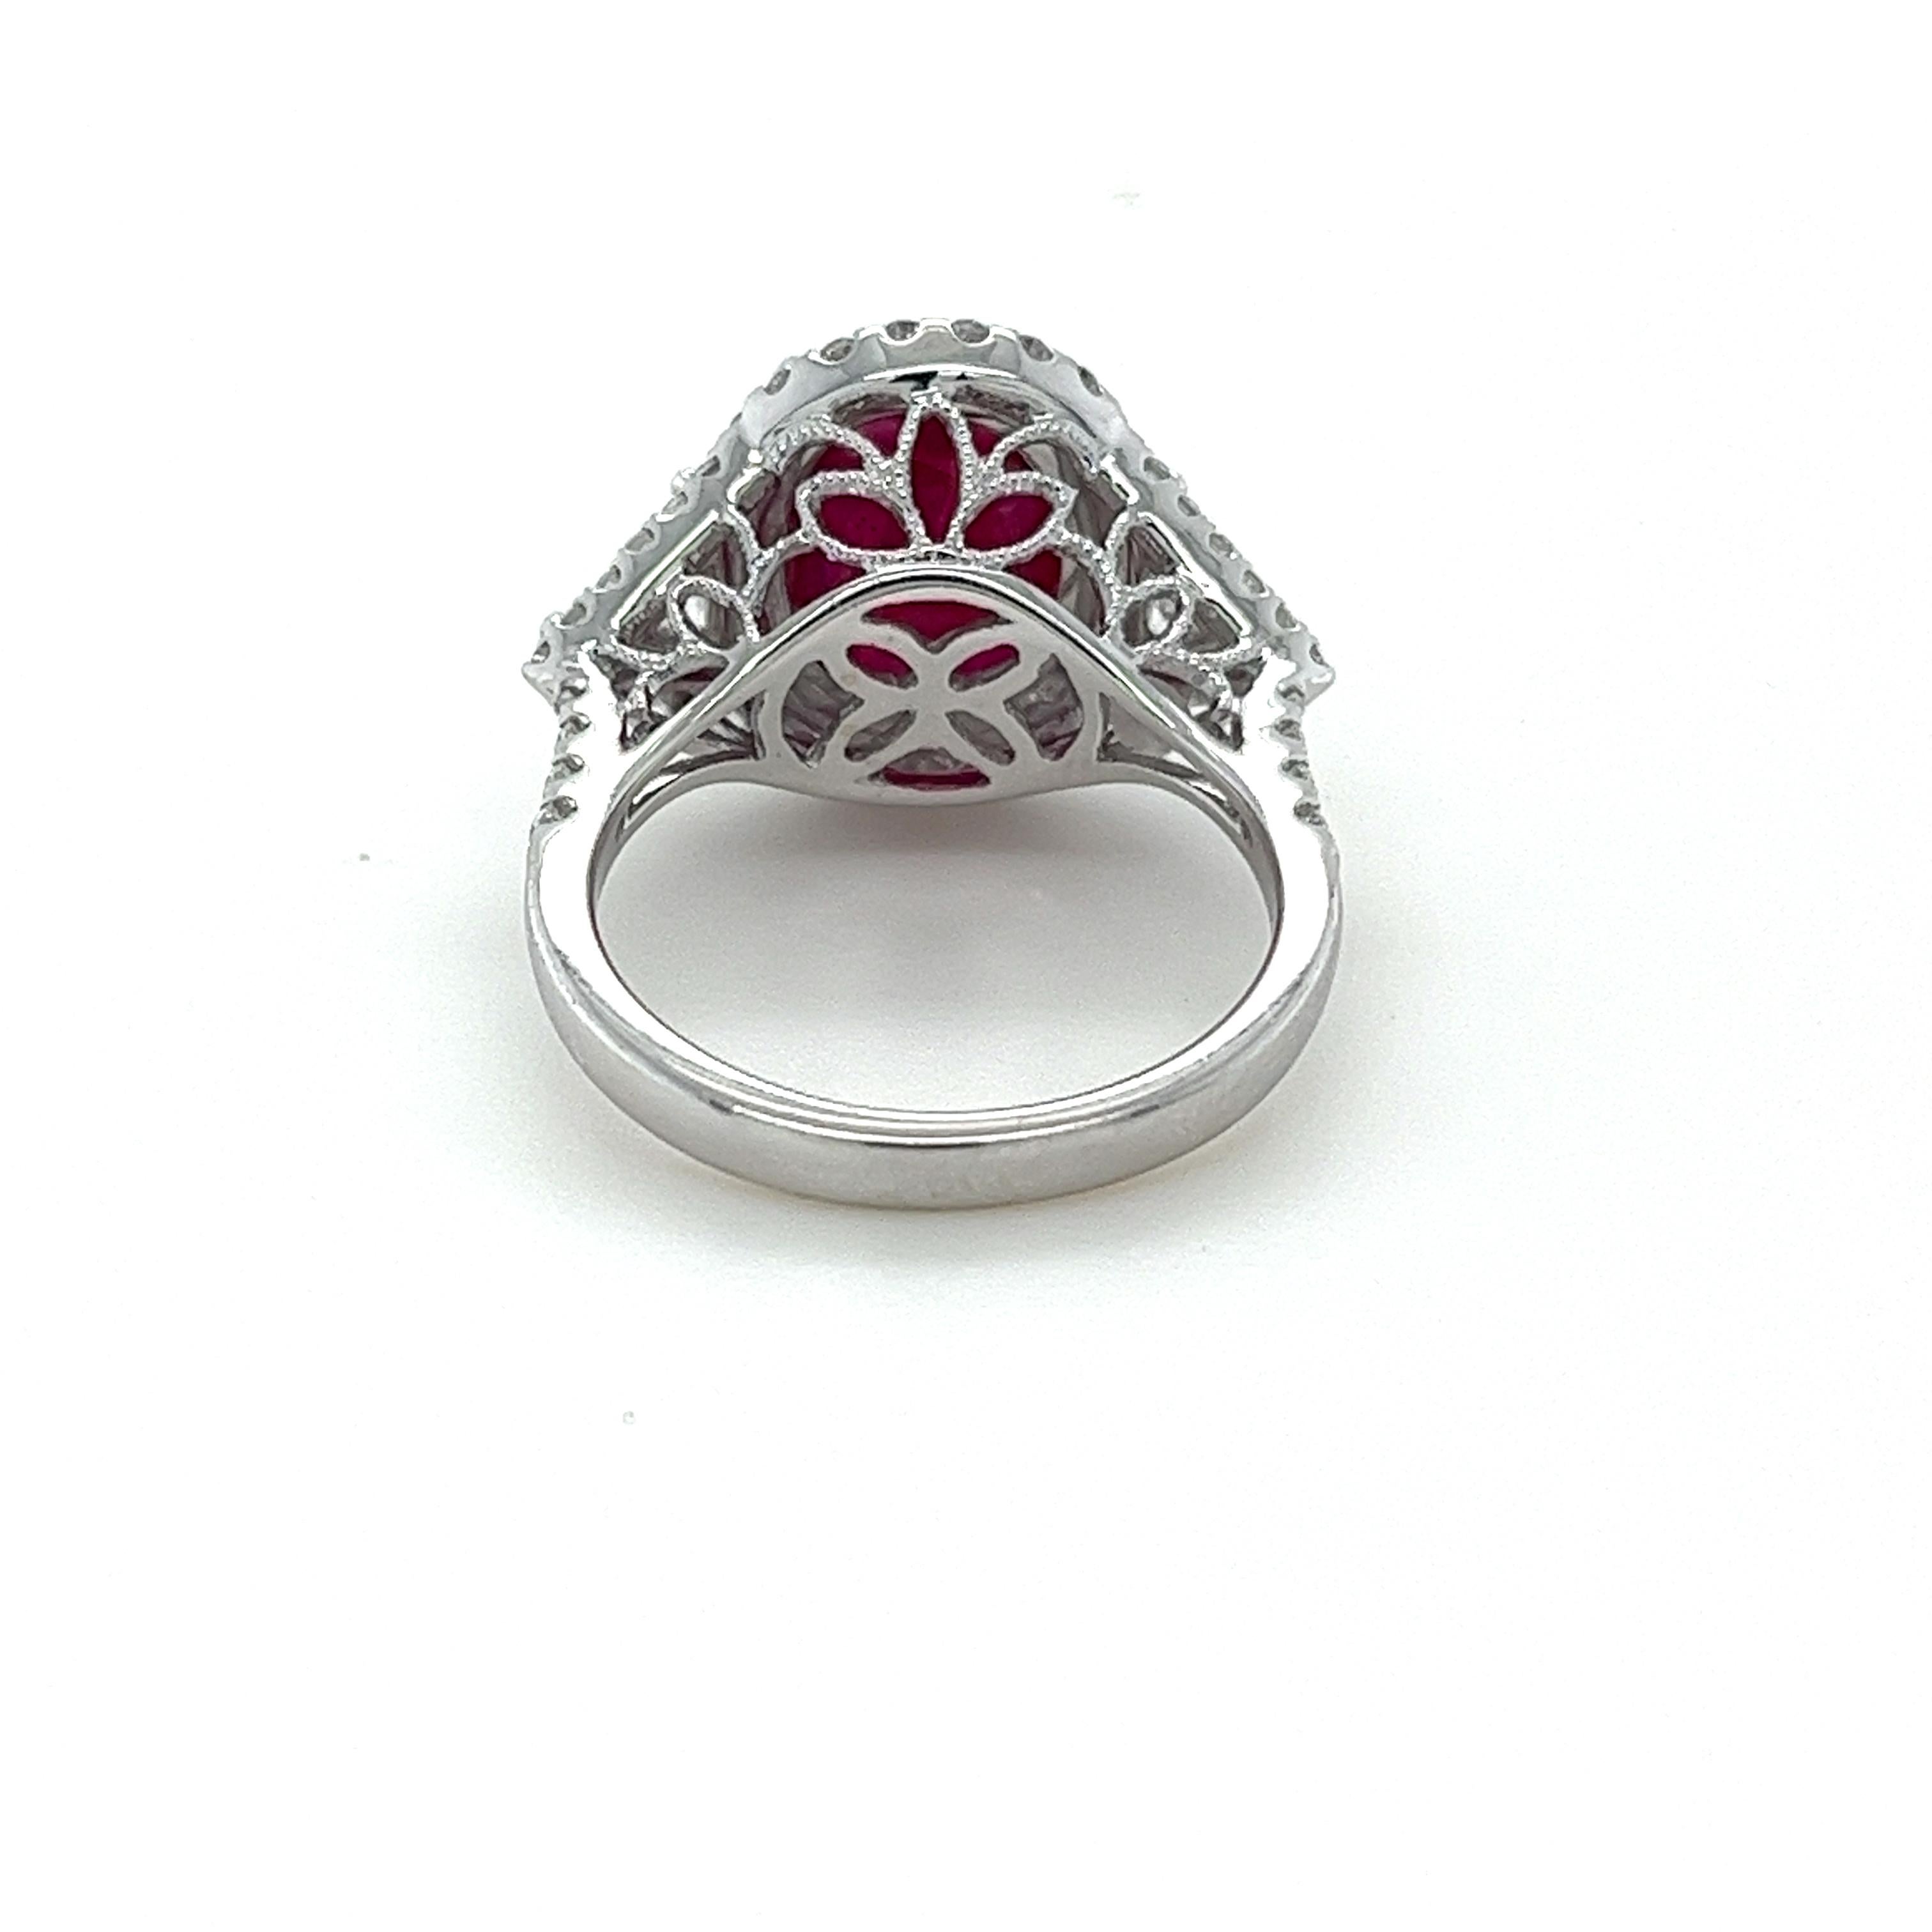 Oval Cut 4.28 Carat Ruby & Diamond Ring in 18 Karat White Gold For Sale